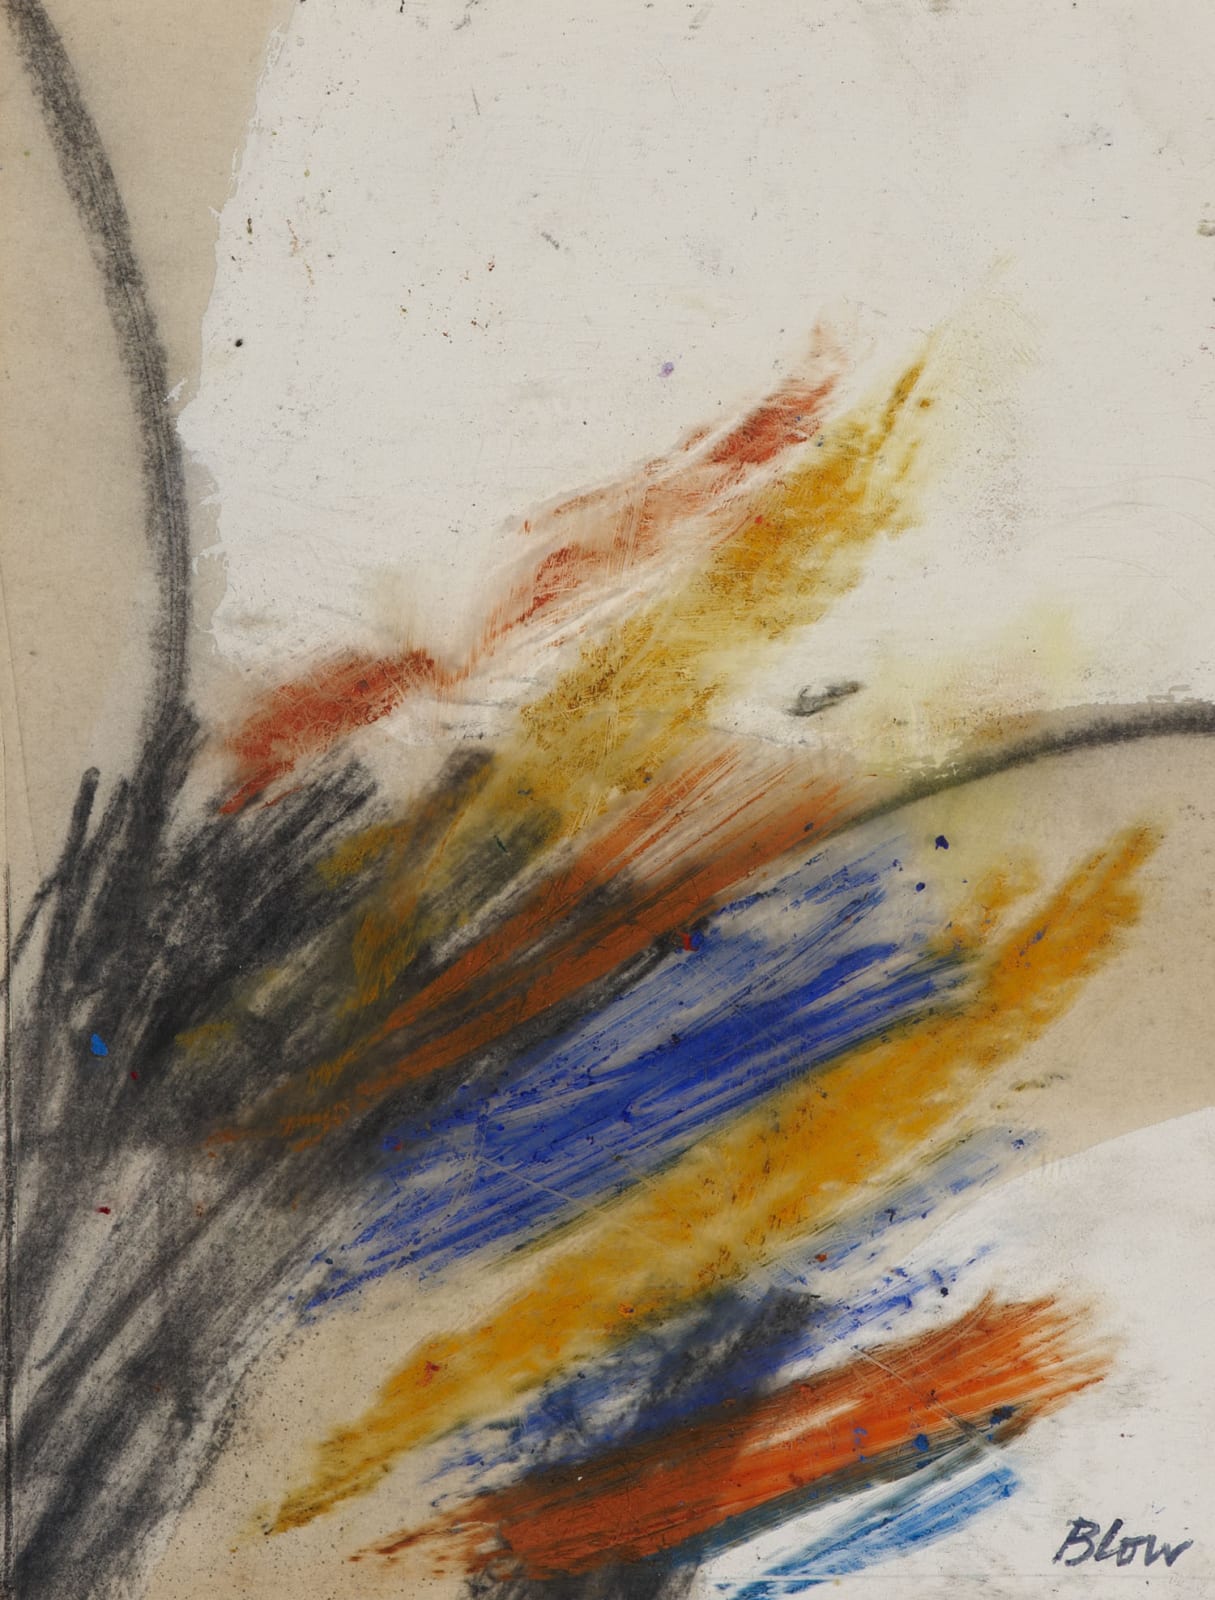 Sandra Blow (1925-2006) Drawing No. 21 c.1969 Crayon, gouache and oil on paper 18 x 14 cm Ben Uri Collection © Sandra Blow estate To see and discover more about this artist click here